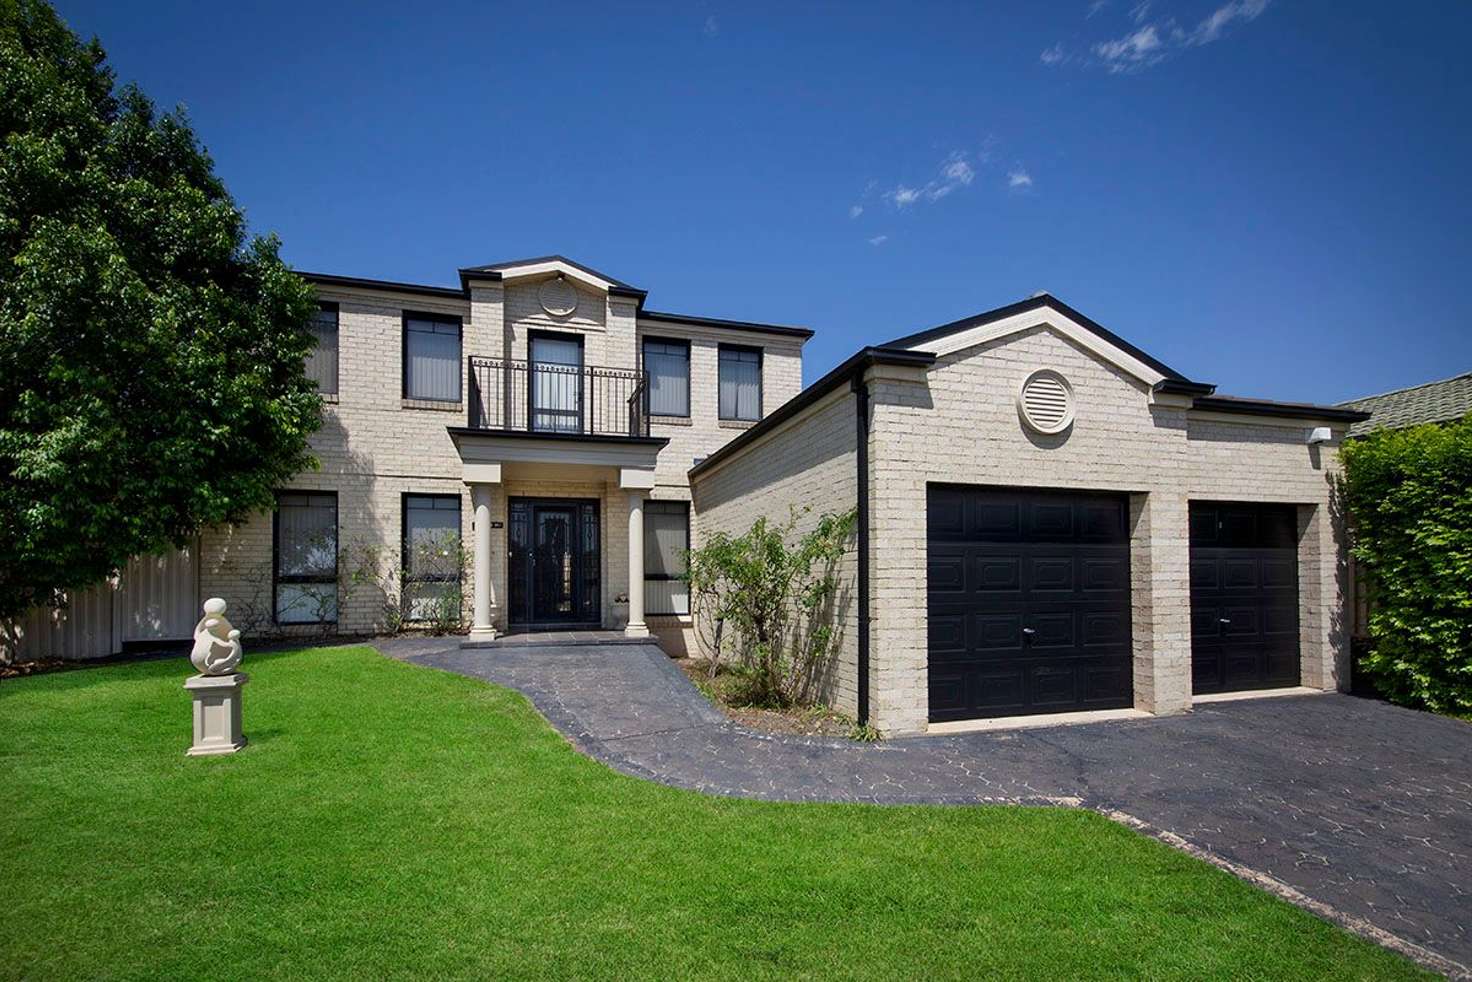 Main view of Homely house listing, 1 Doyle Street, Barden Ridge NSW 2234